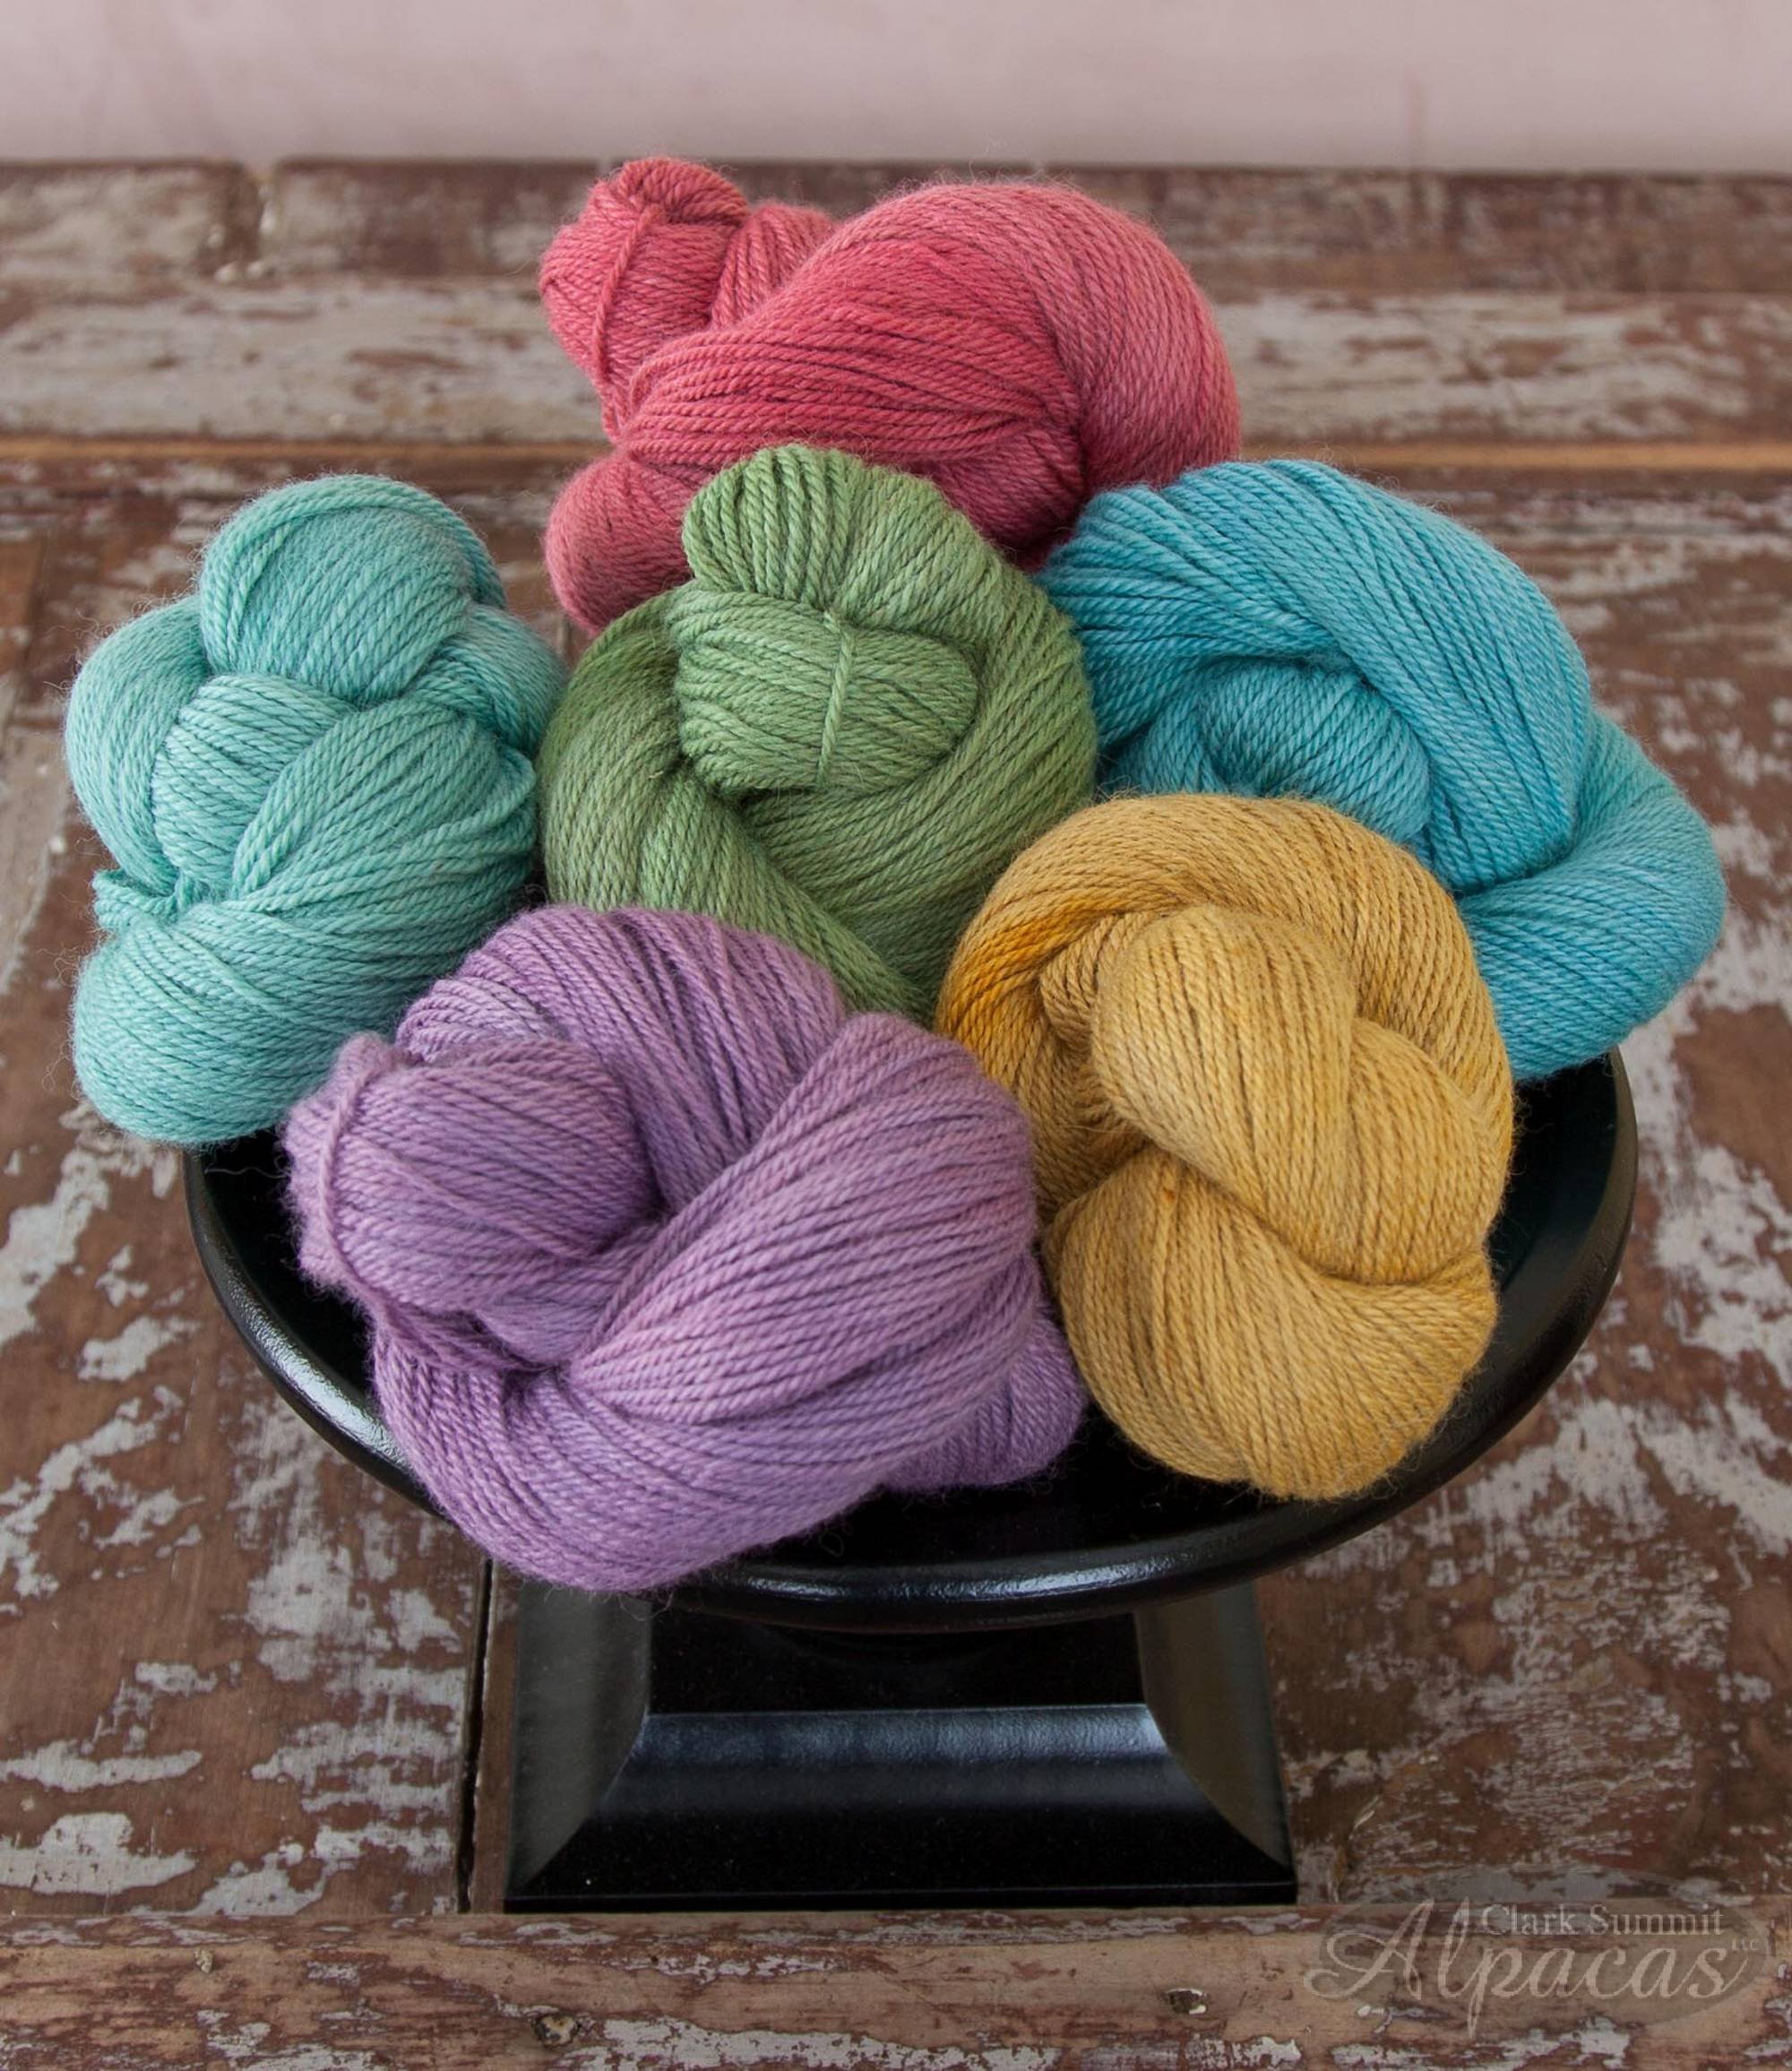 Can You Use Arm Knitting Yarn for Spinning? — The Mermaid's Den